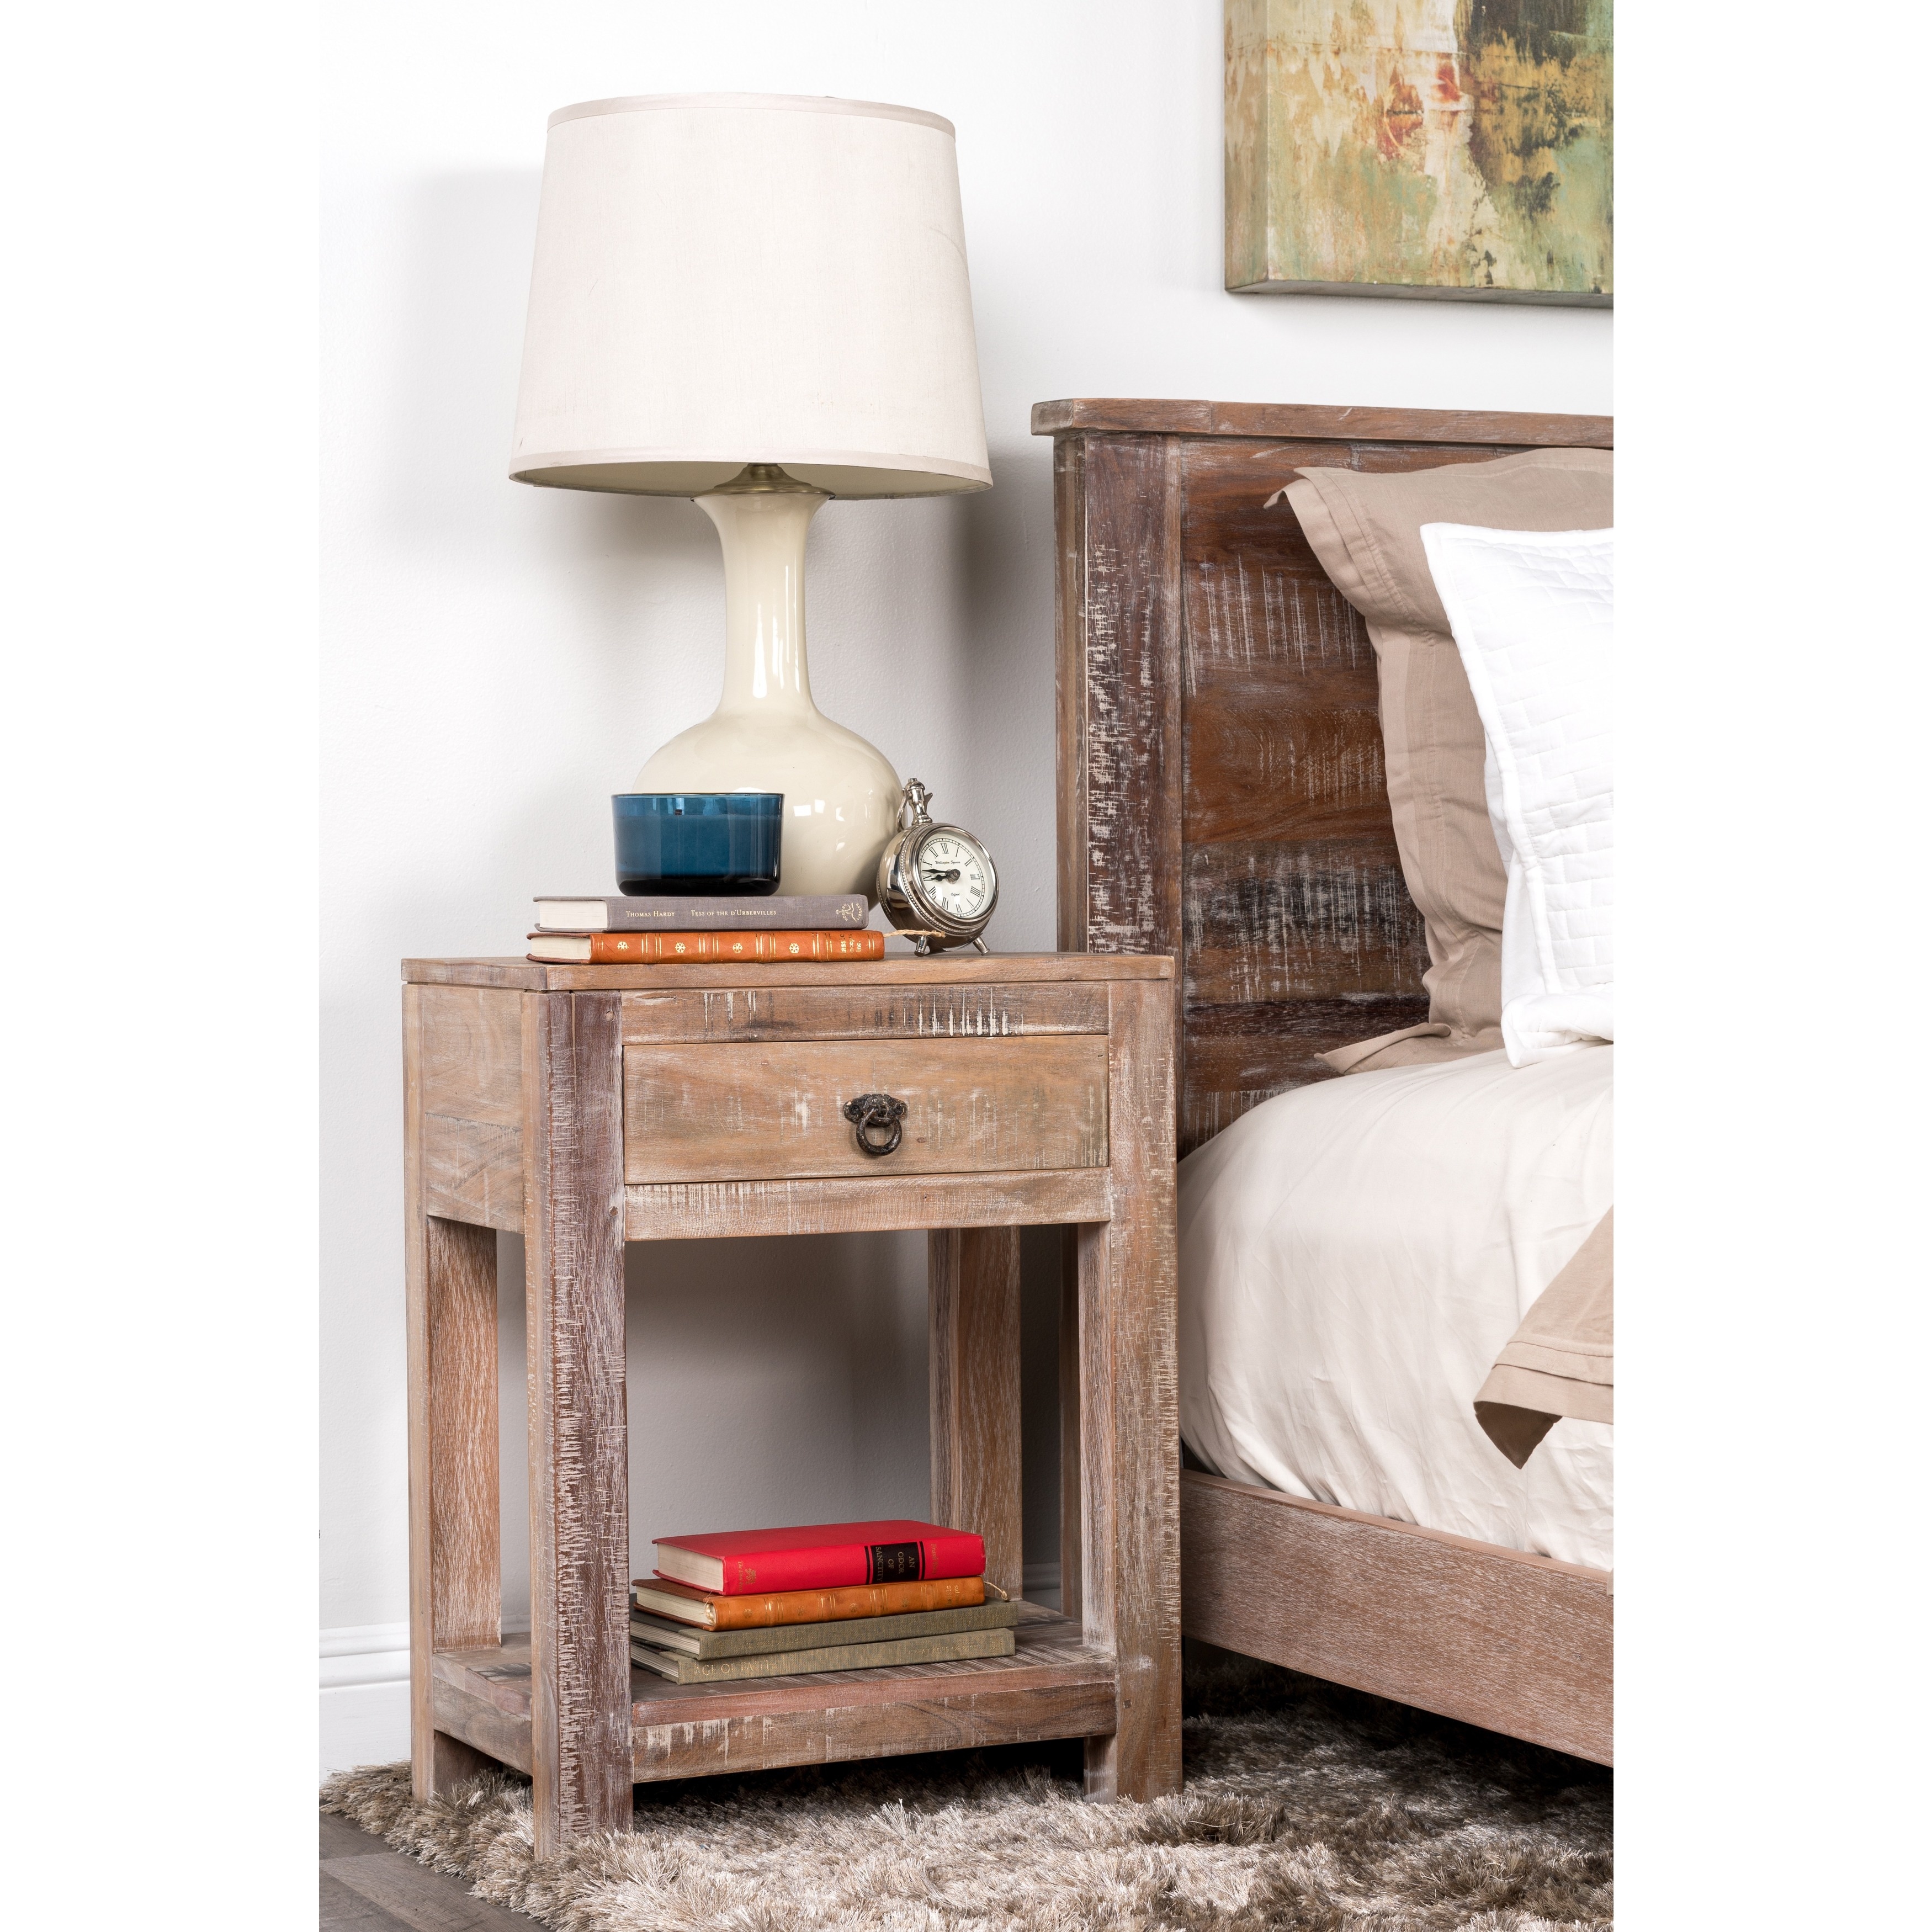 Hamshire 1 drawer End Table Today $233.99 Sale $210.59 Save 10%